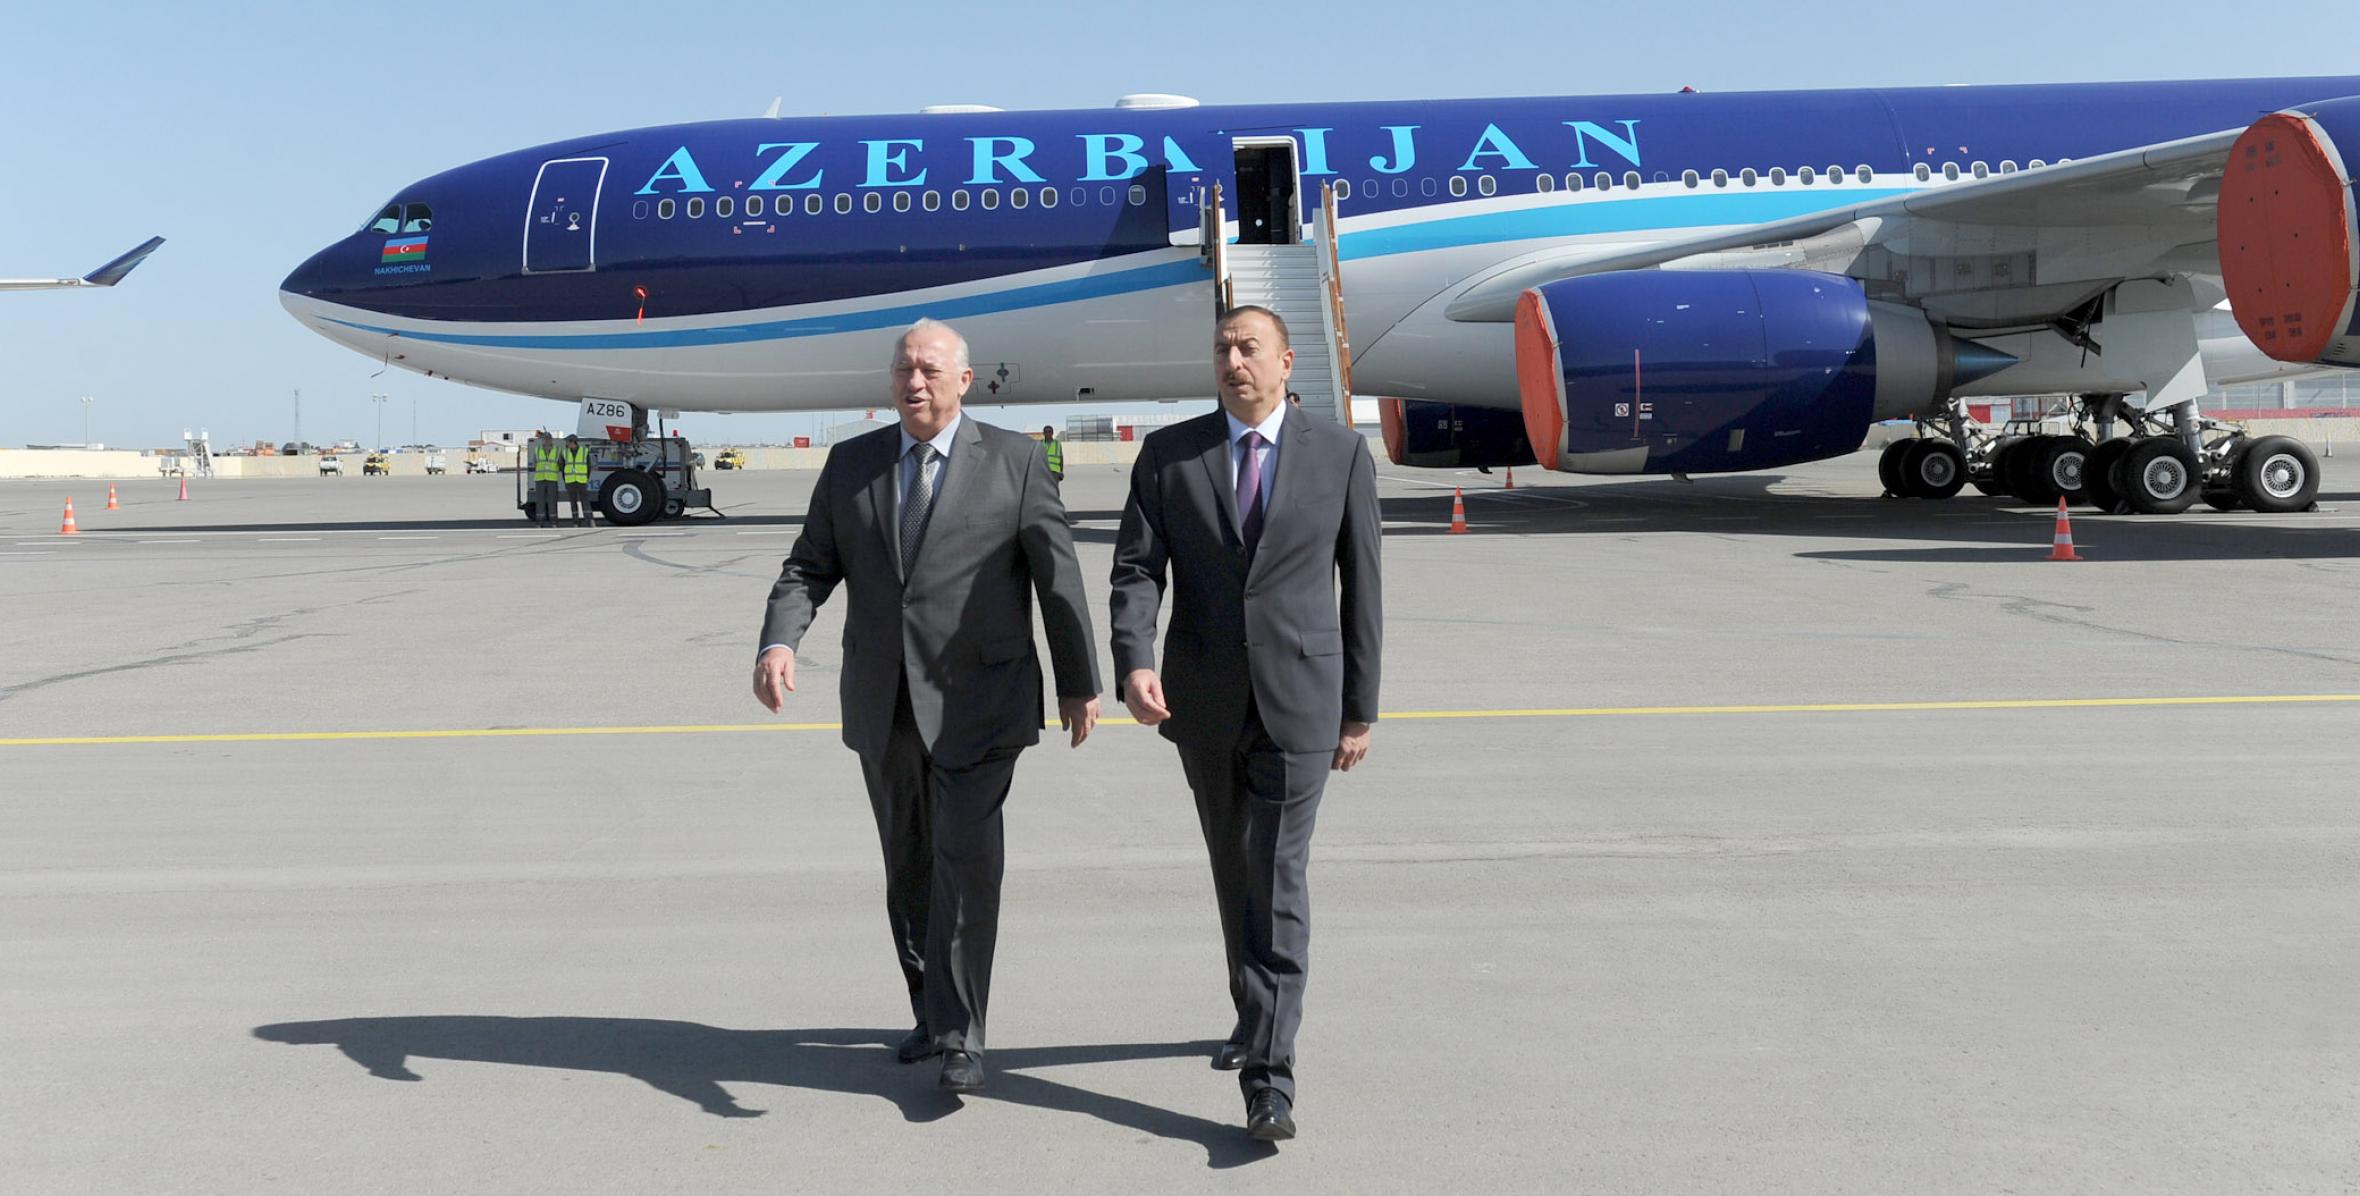 Ilham Aliyev examined progress of construction of a modern hangar and passenger terminal facilities at the Heydar Aliyev International Airport, attended the opening of the International Logistics Center and reviewed new passenger liners